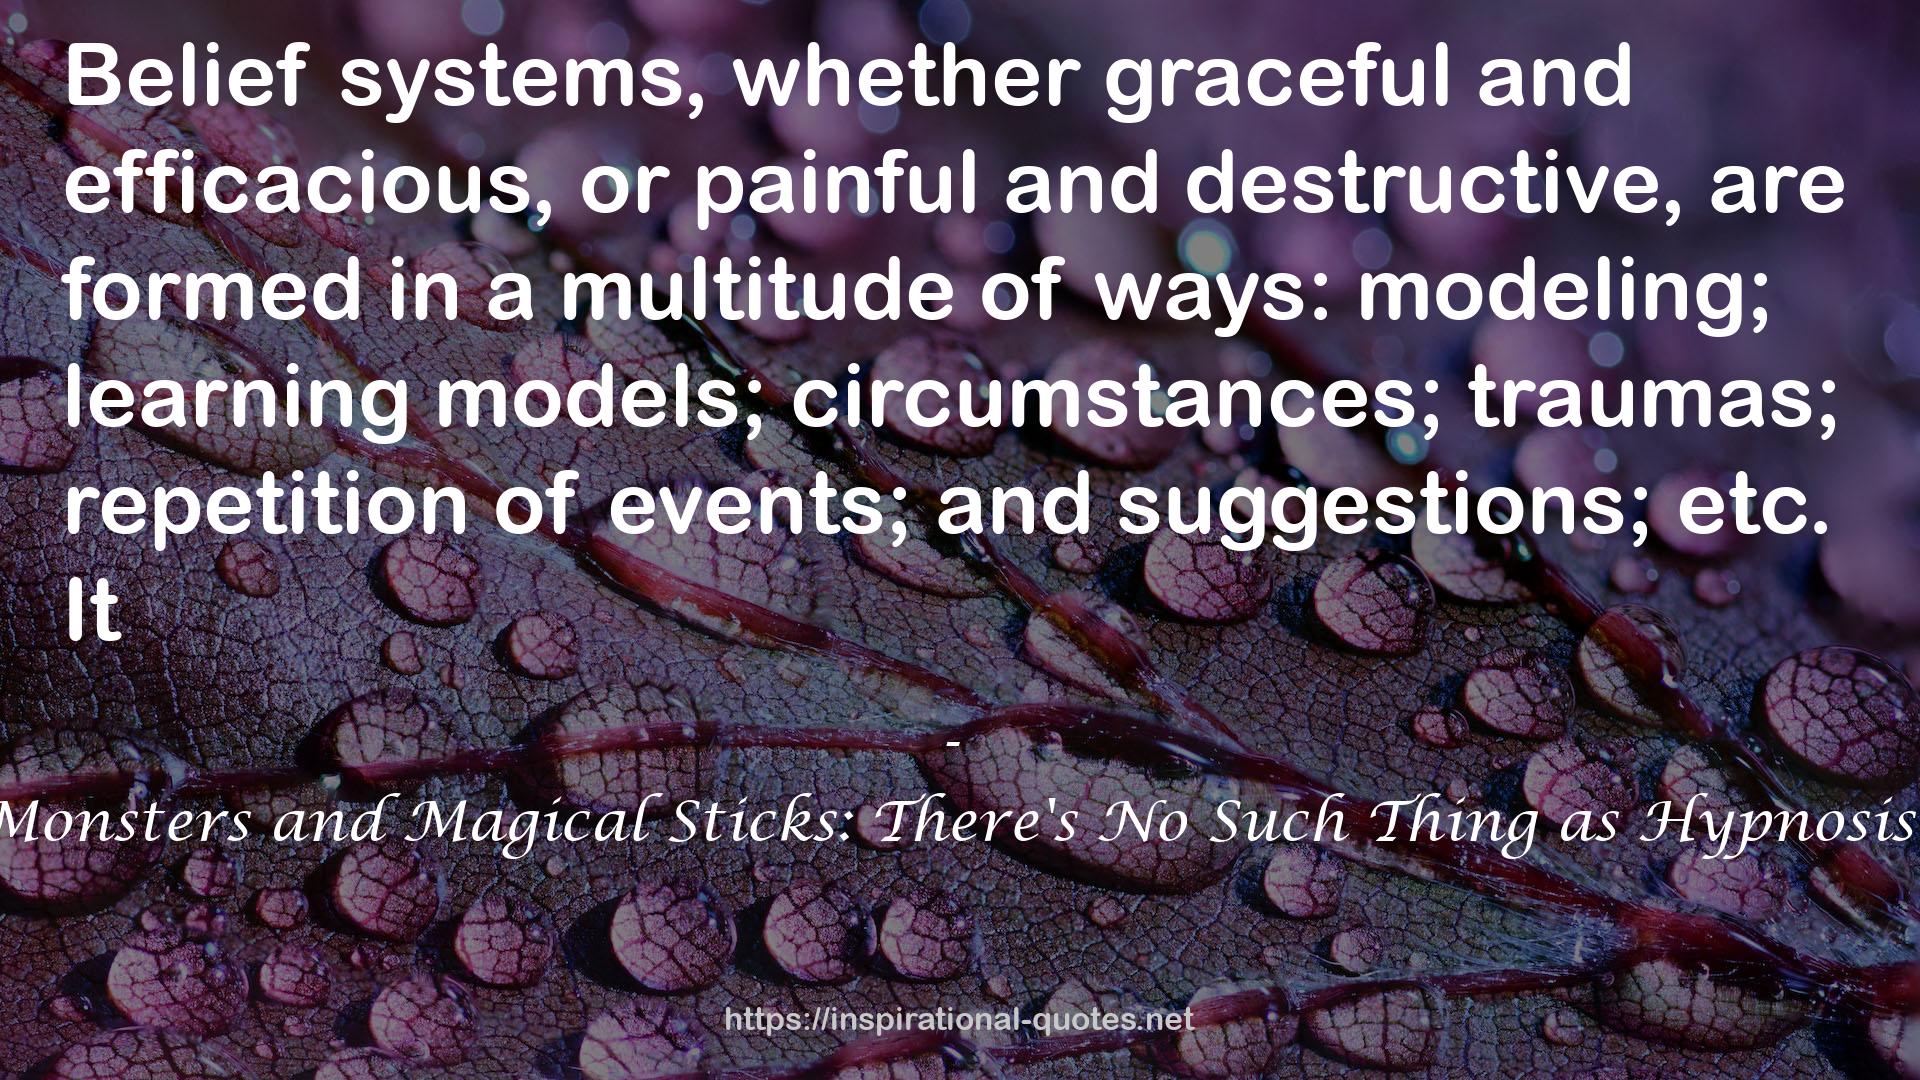 Monsters and Magical Sticks: There's No Such Thing as Hypnosis? QUOTES